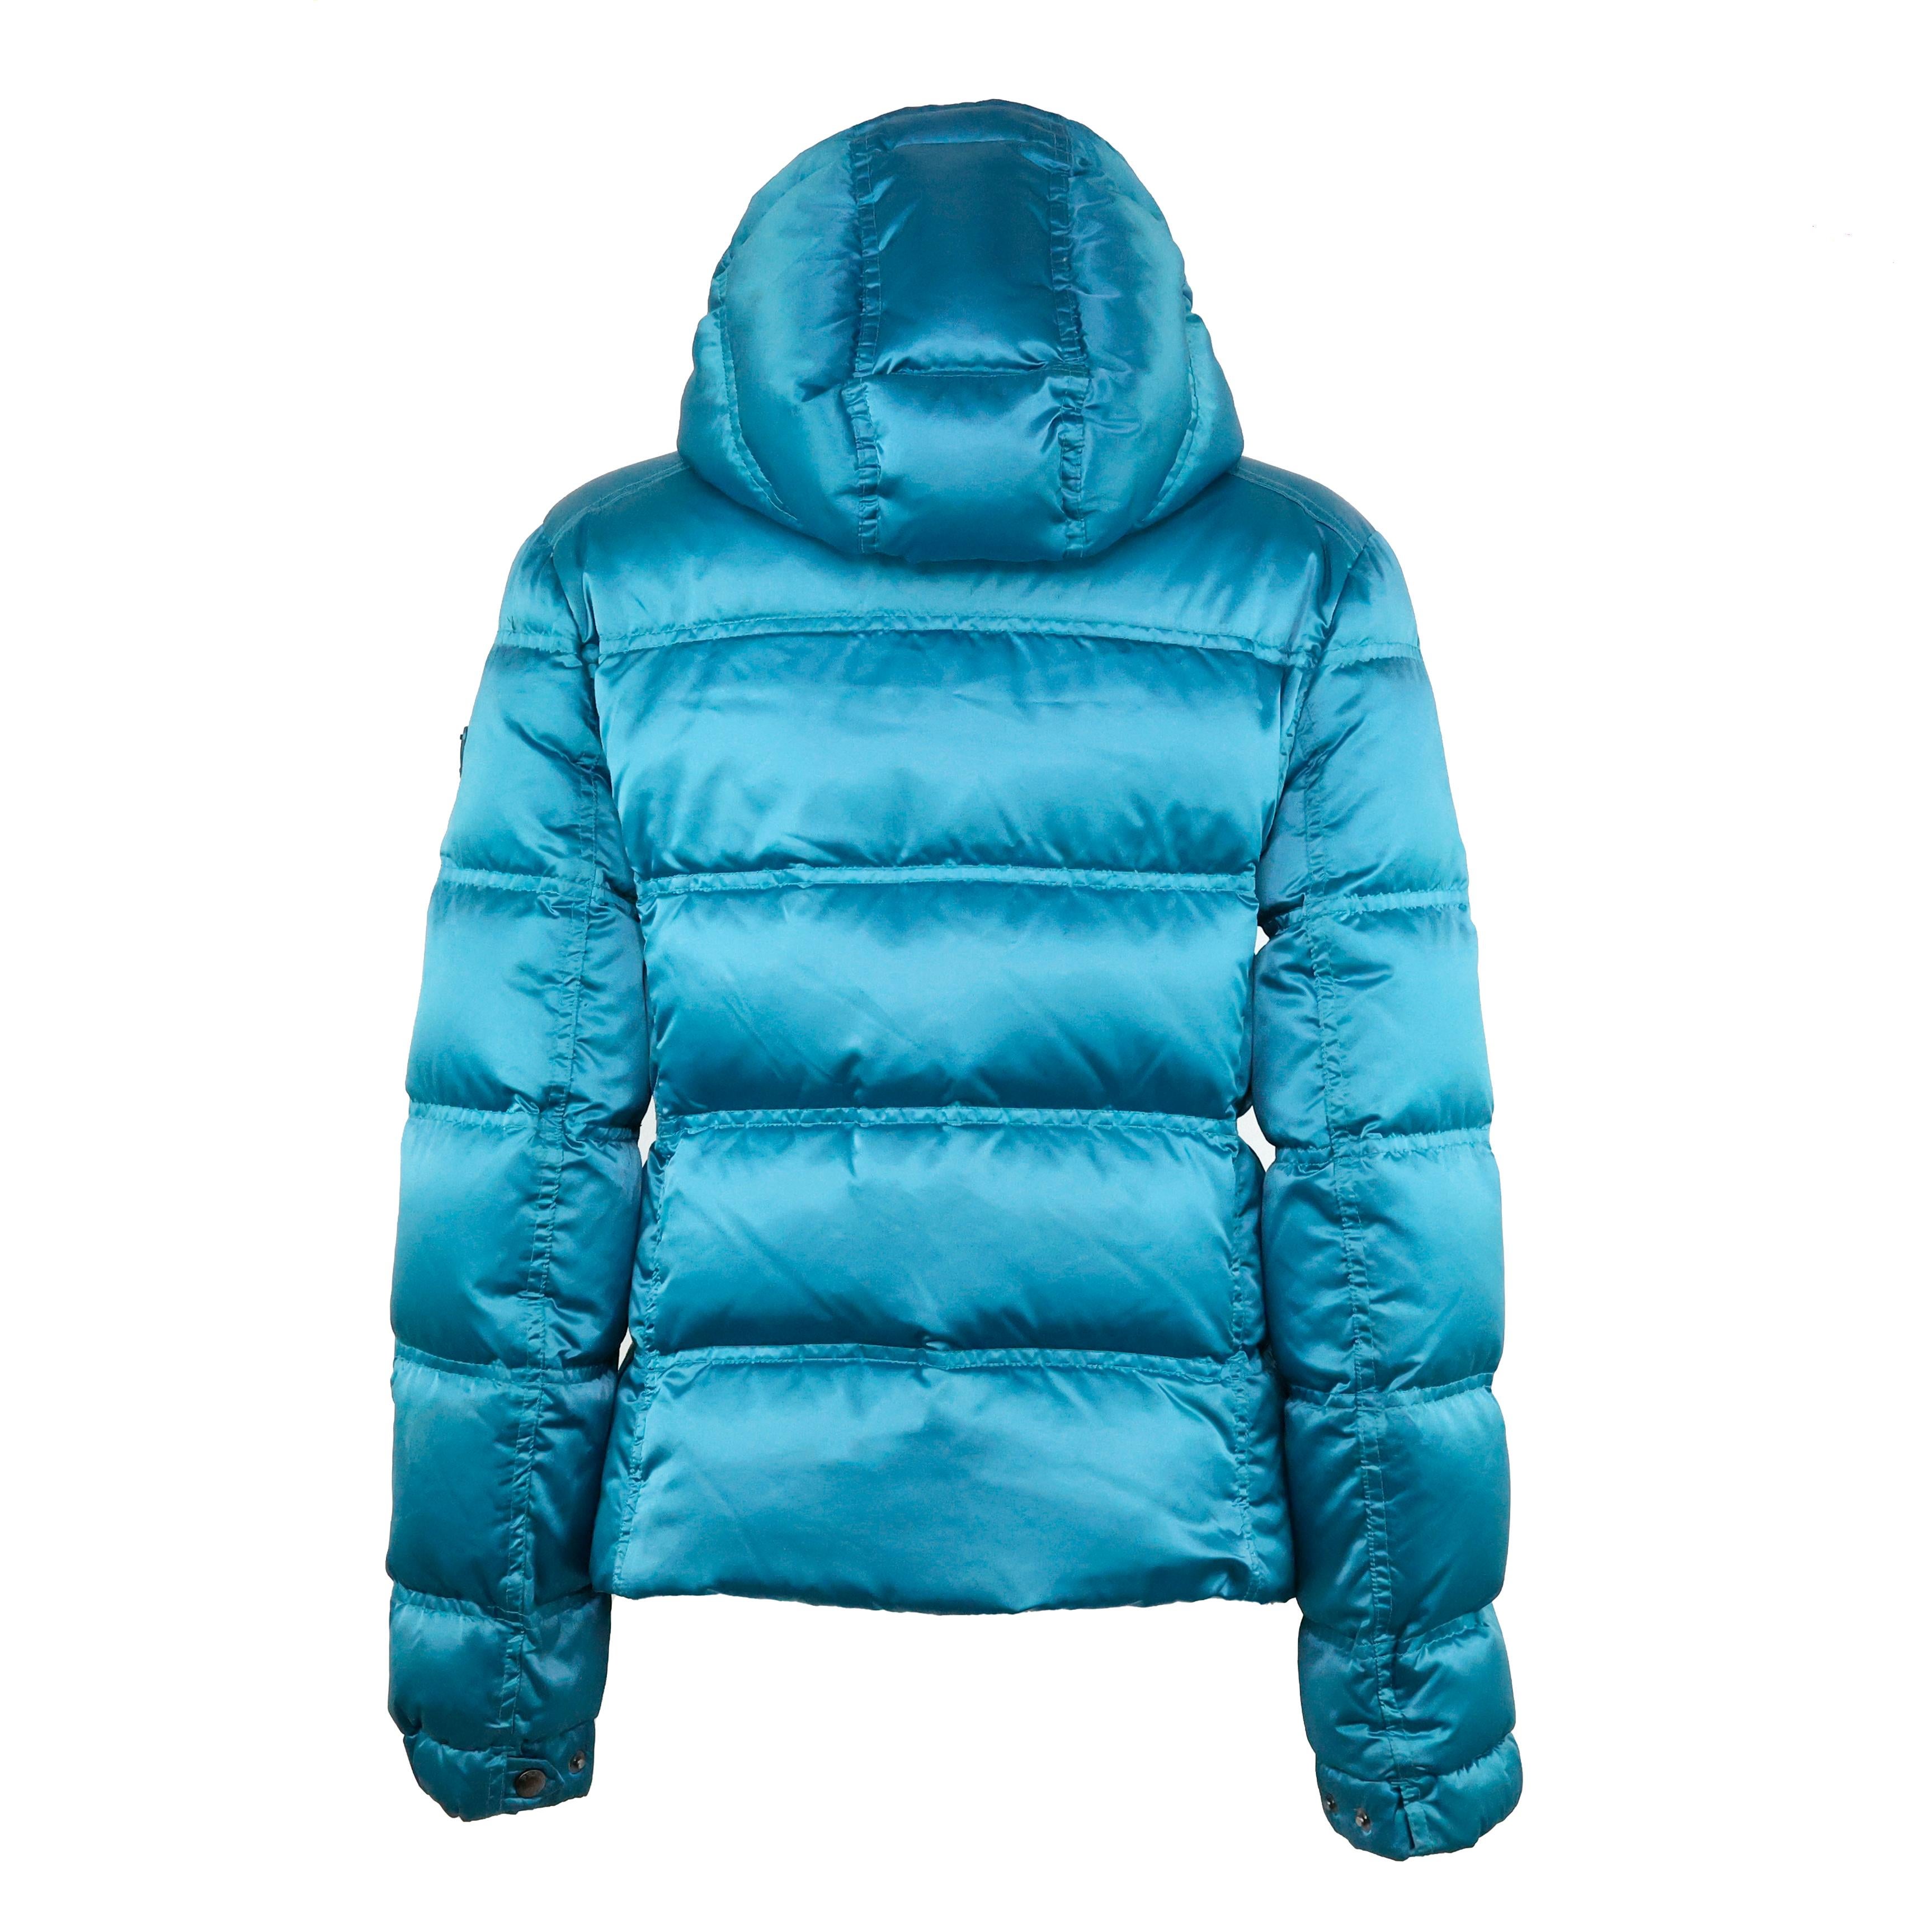 Prada Triangle Logo Puffer Jacket in Turquoise Satin In Excellent Condition For Sale In Bressanone, IT